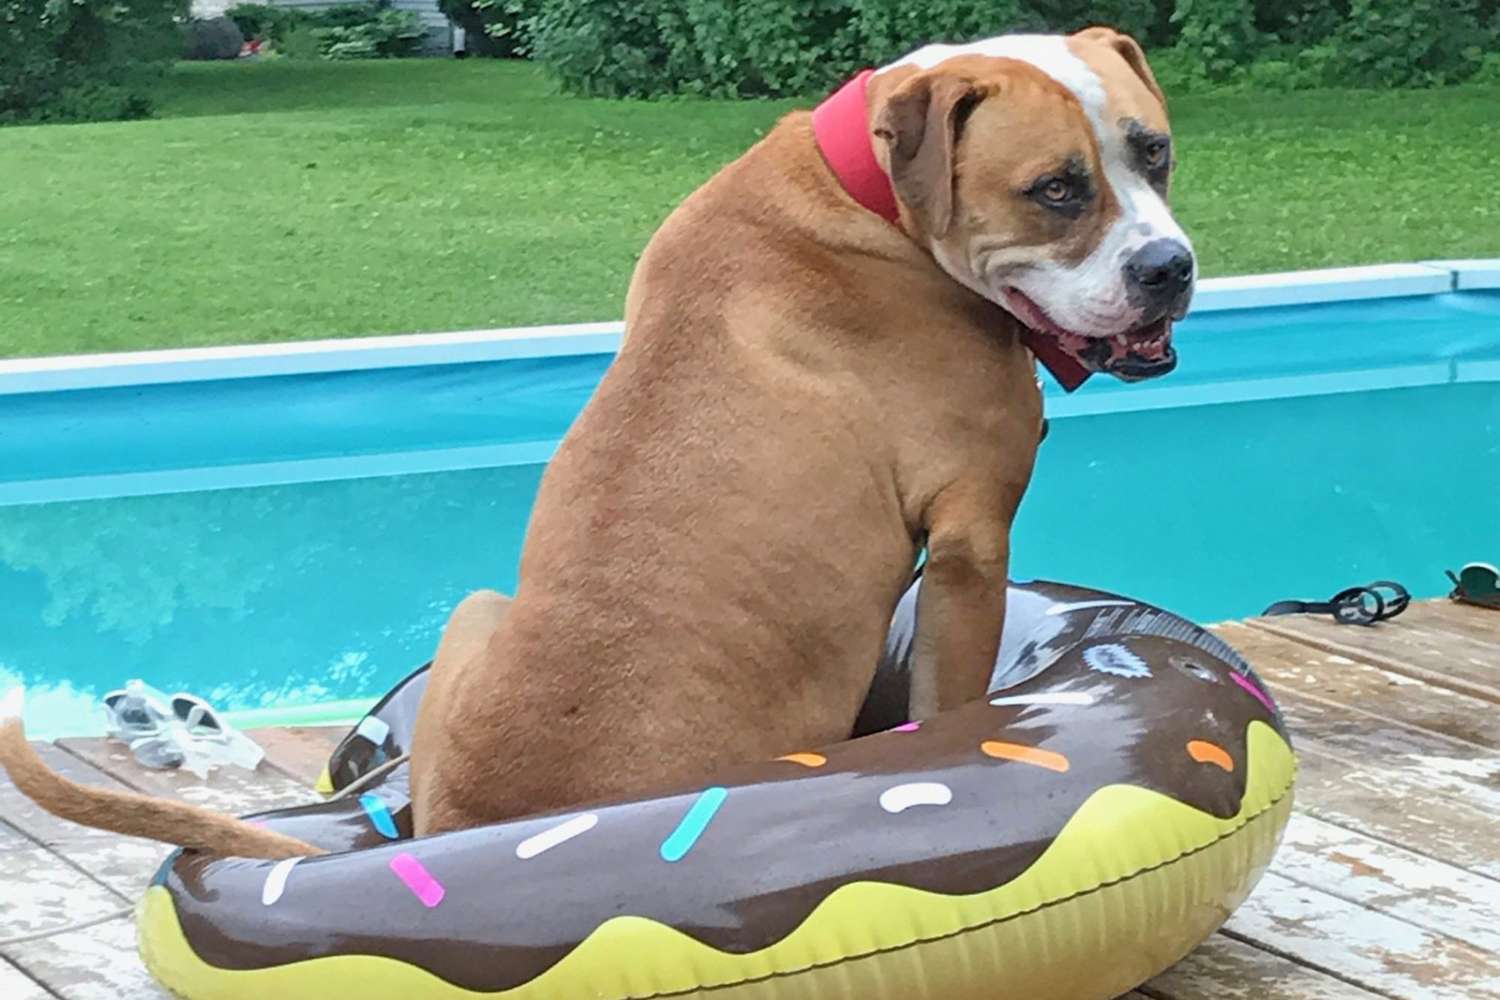 Big dog sits in the middle of a donut pool floaty